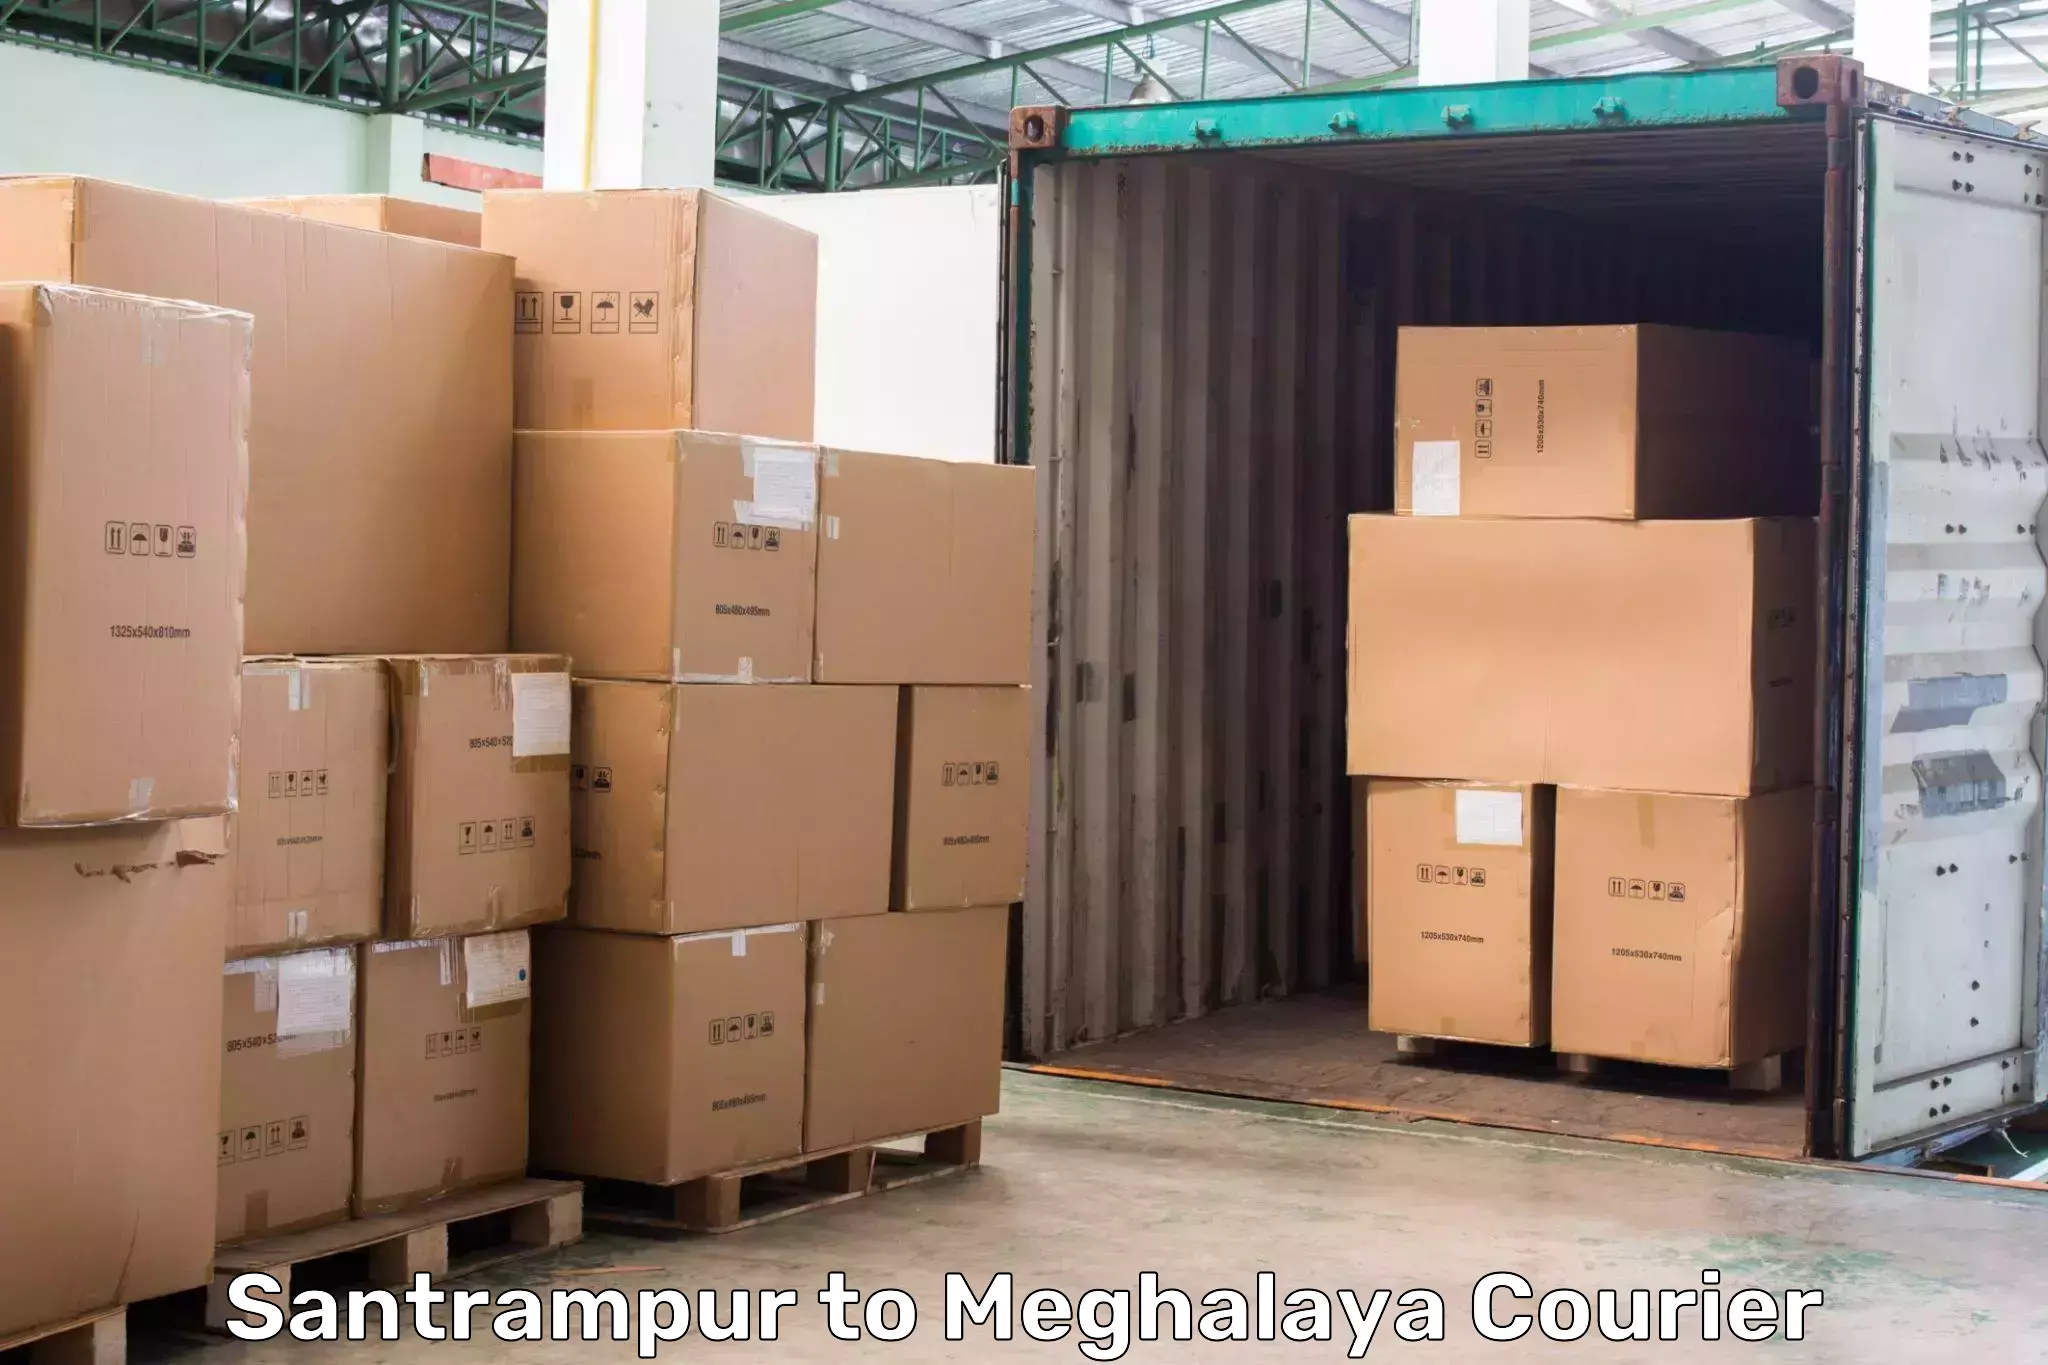 State-of-the-art courier technology Santrampur to Meghalaya